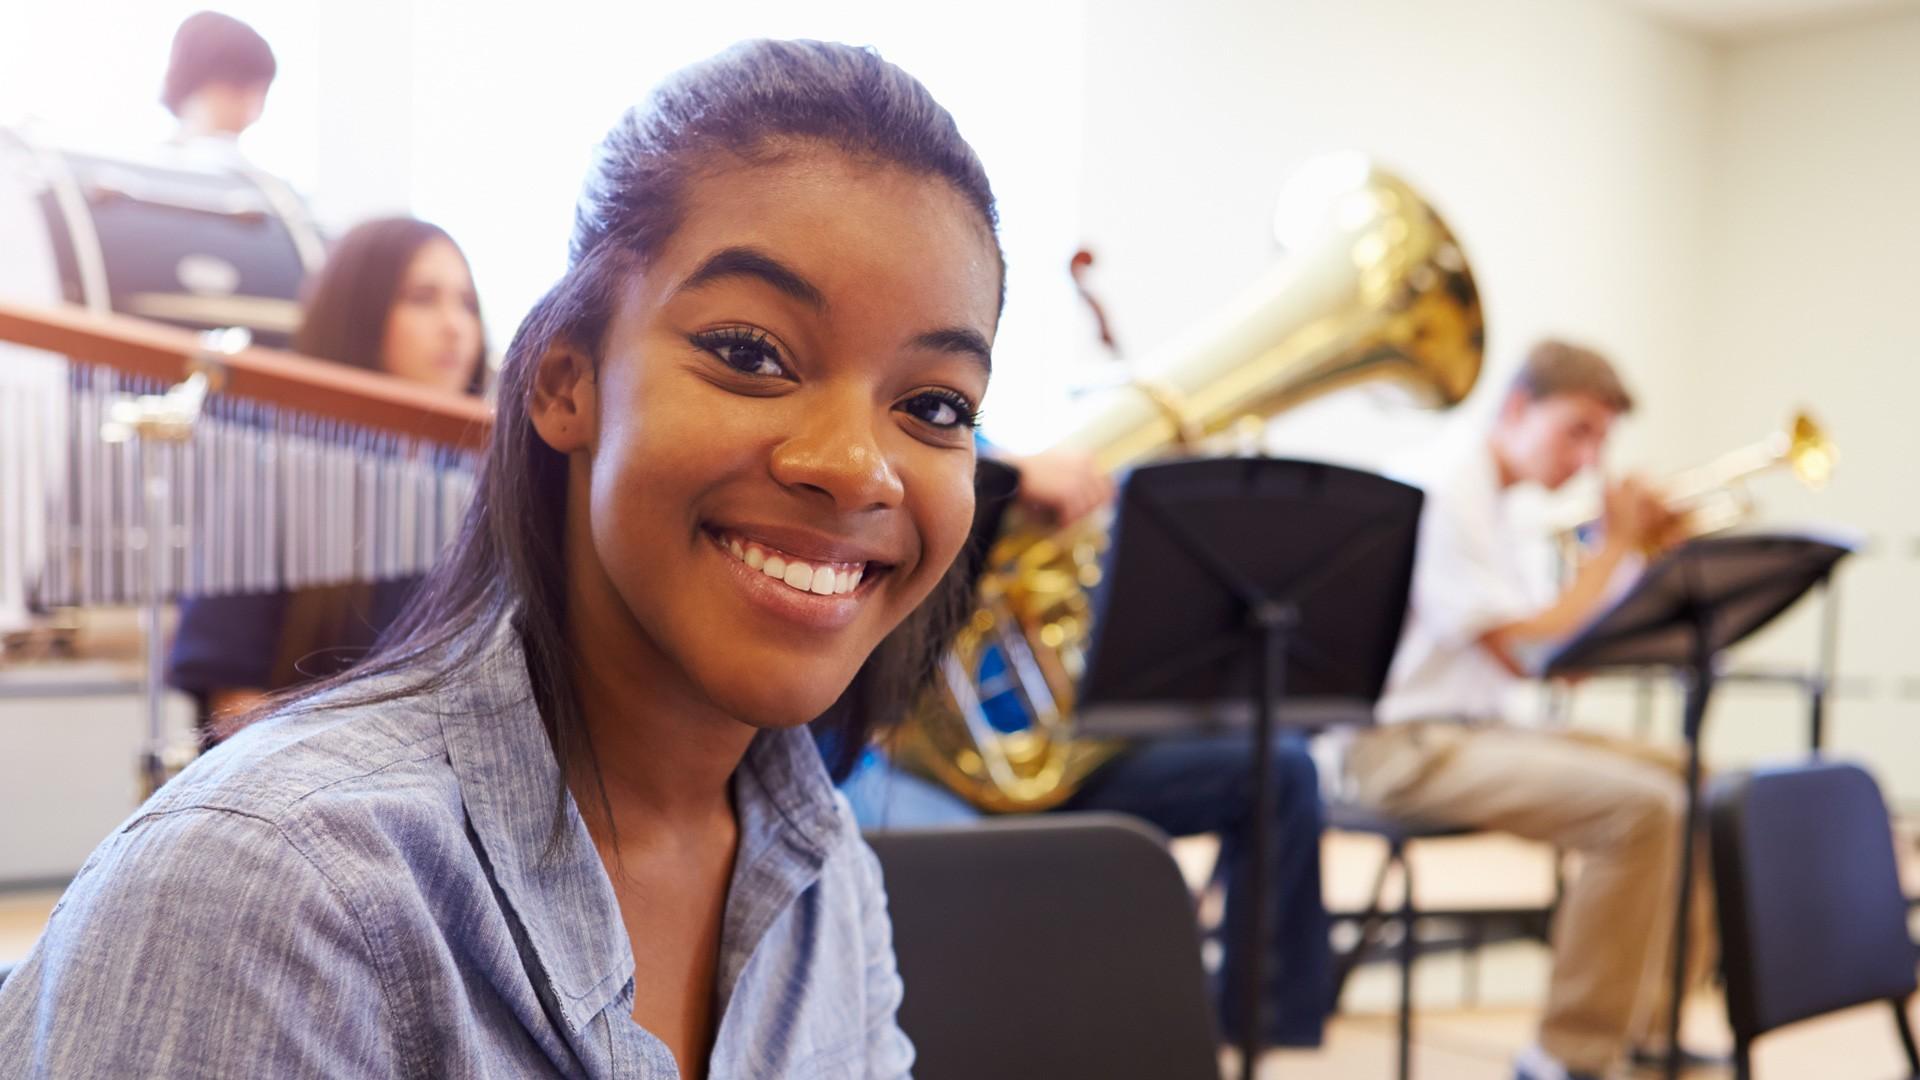 Music Student smiling